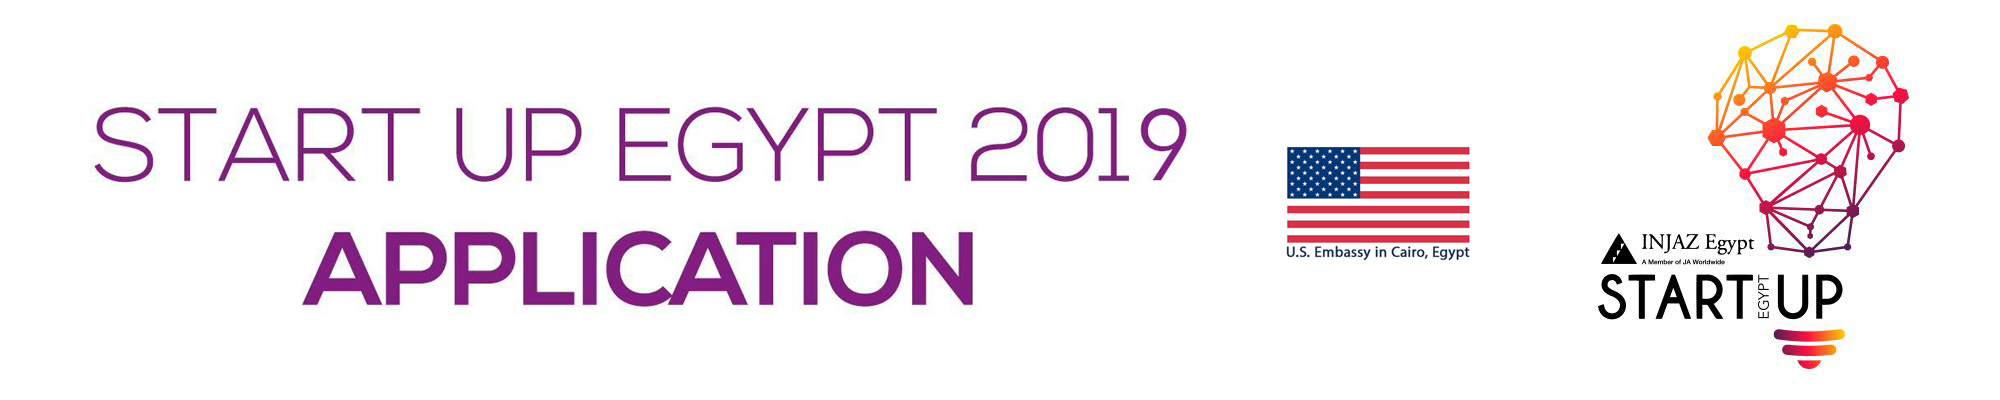 Injaz and the US Embassy Call Entrepeneurs To Apply For Startup Egypt 2019